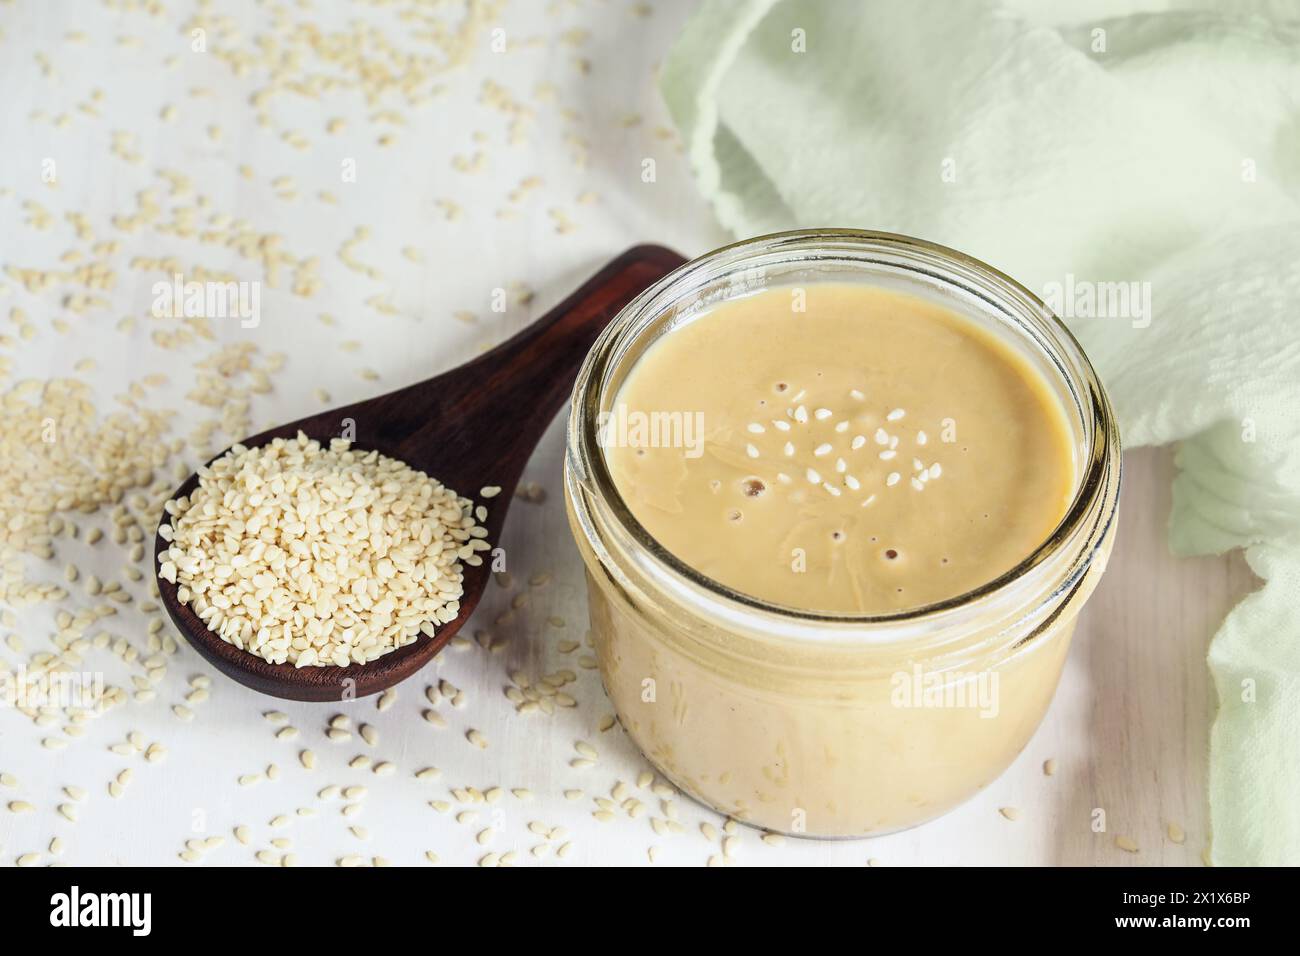 Top view of mason jar filled with tahini. Wooden spoon overflowing with sesame seeds. Top view. Stock Photo